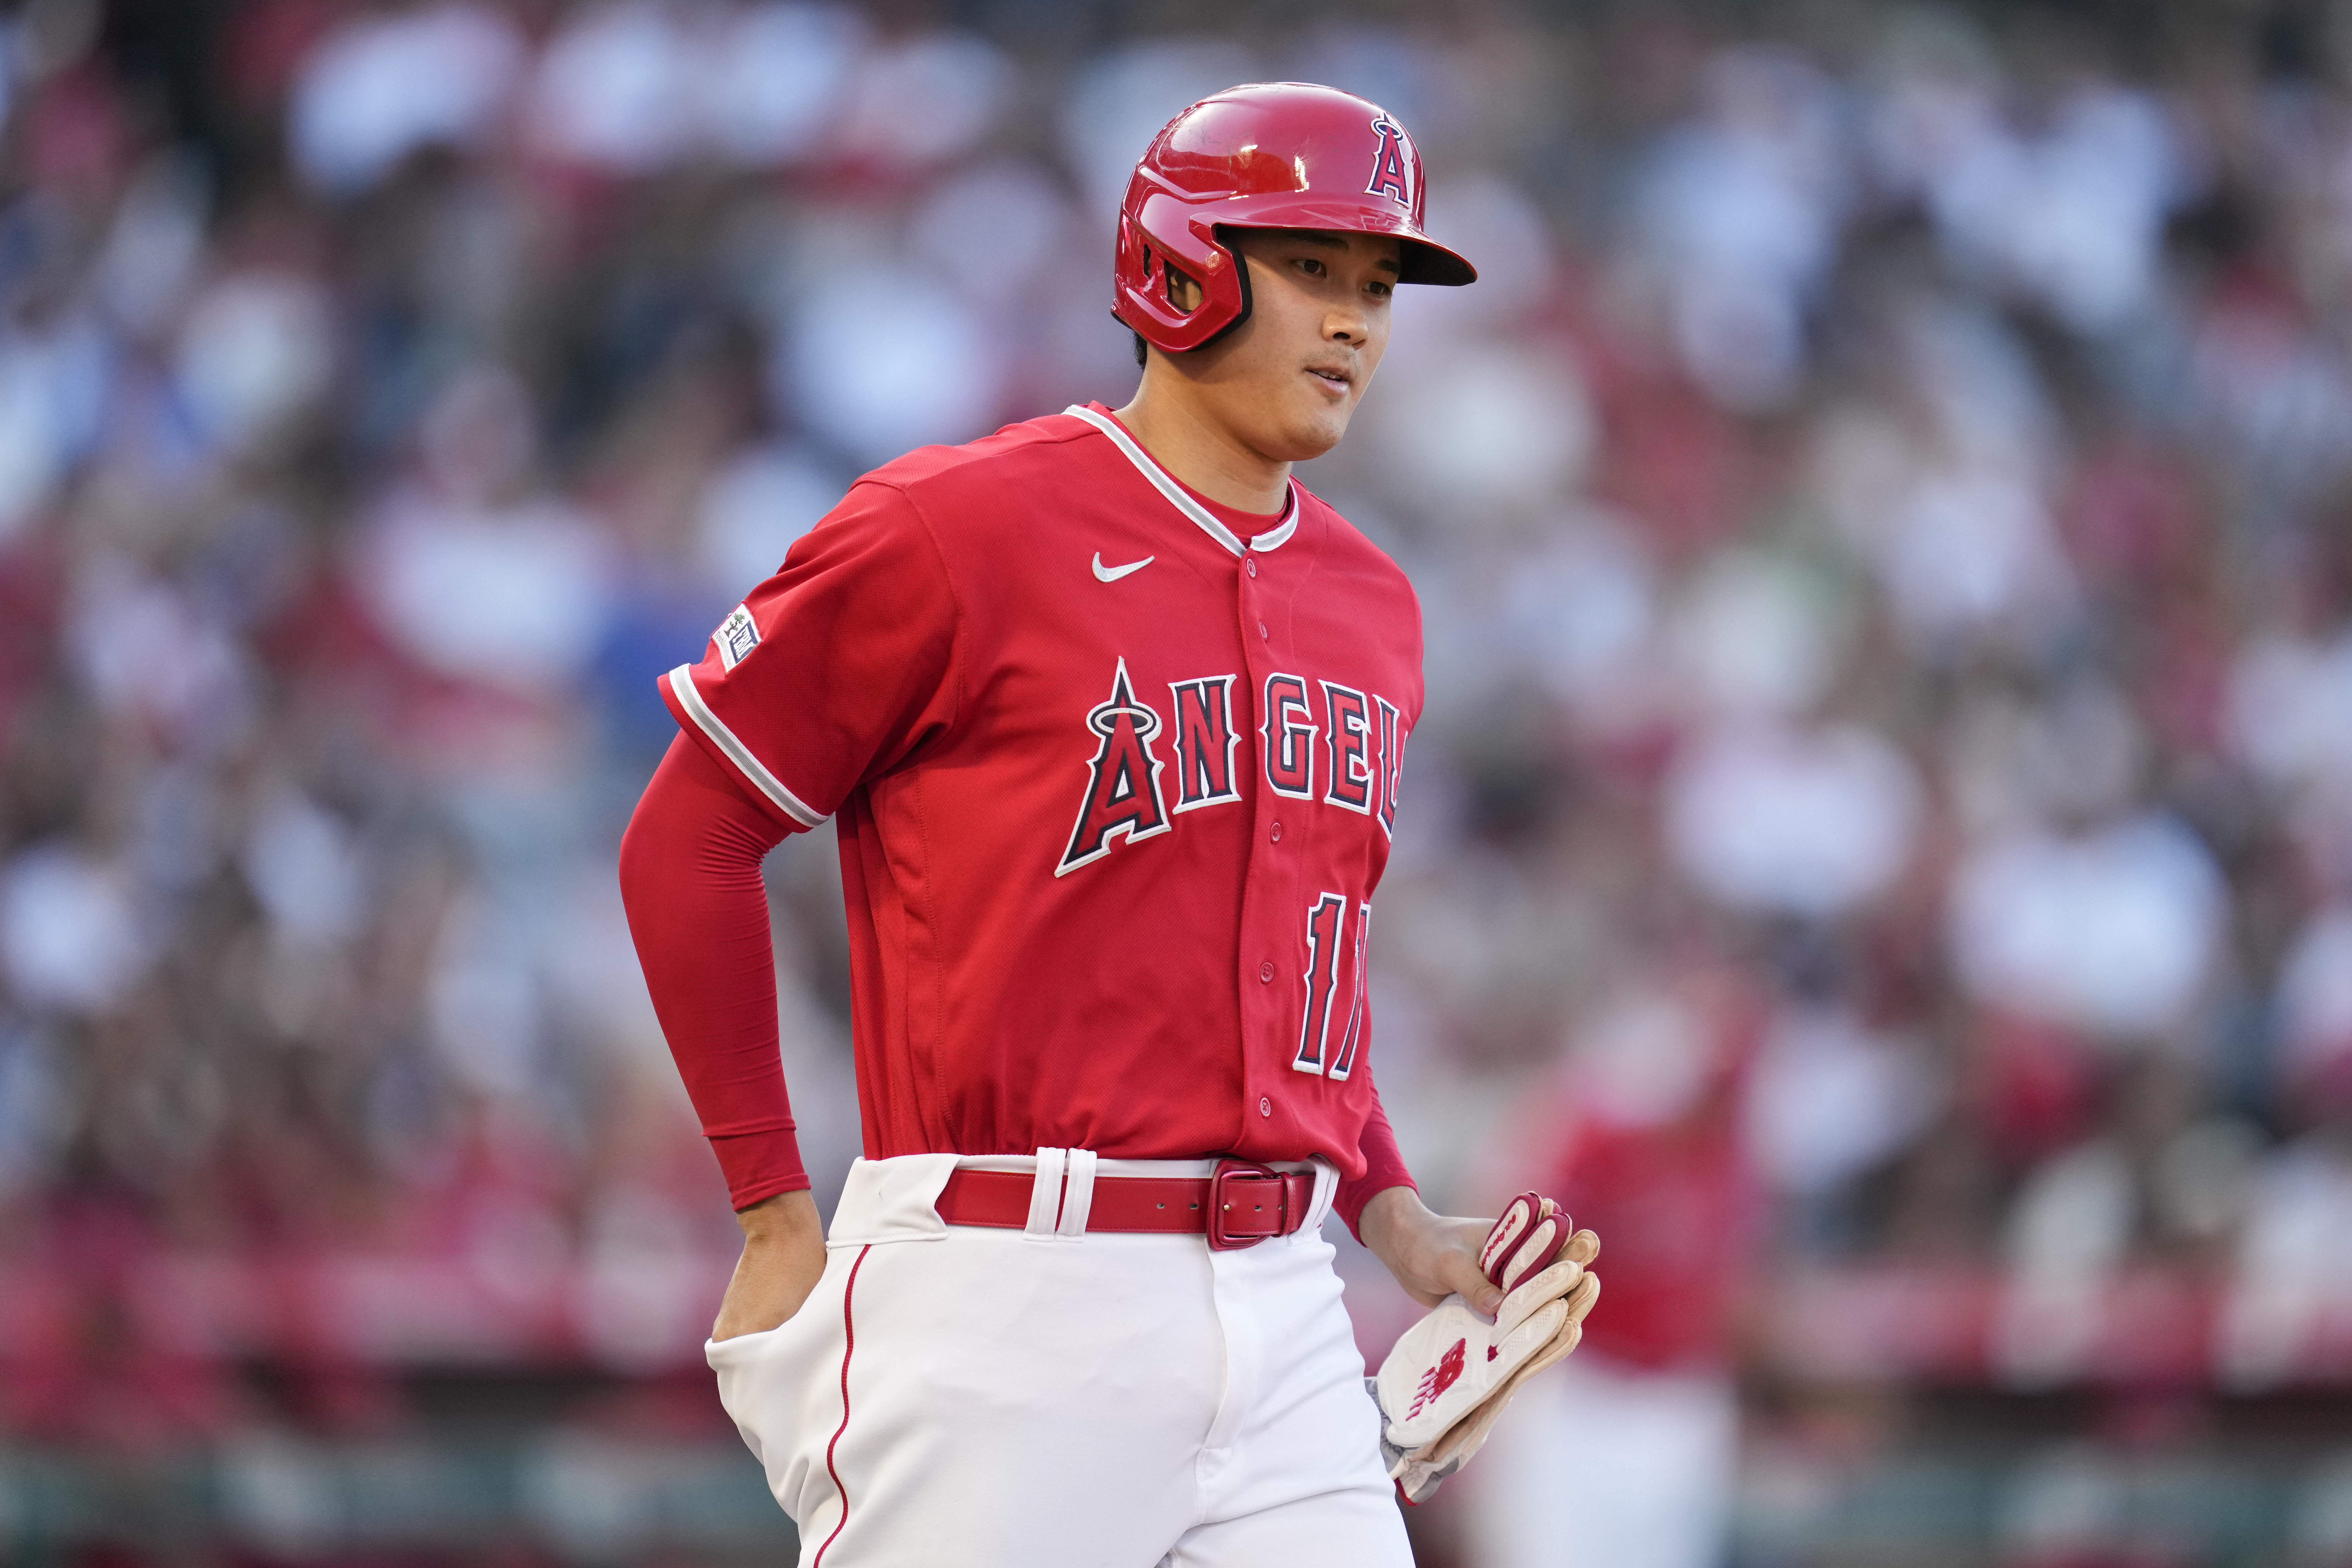 Los Angeles Angels star Shohei Ohtani's two-way showing was a